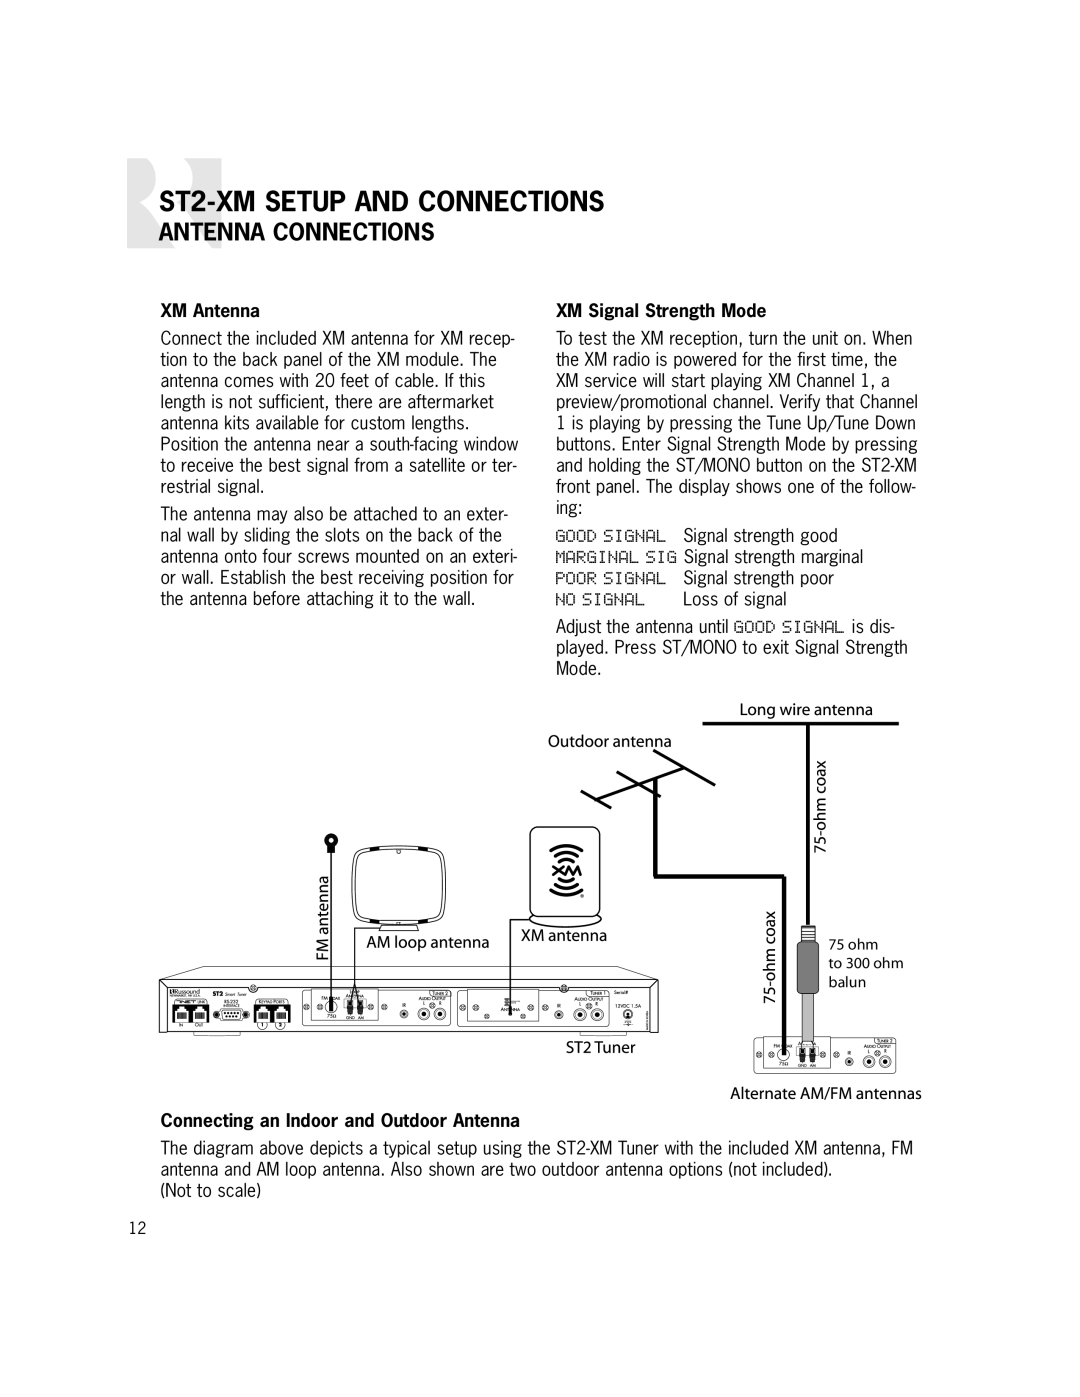 Russound manual Antenna Connections, ST2-XMSETUP AND CONNECTIONS, XM Antenna, XM Signal Strength Mode 